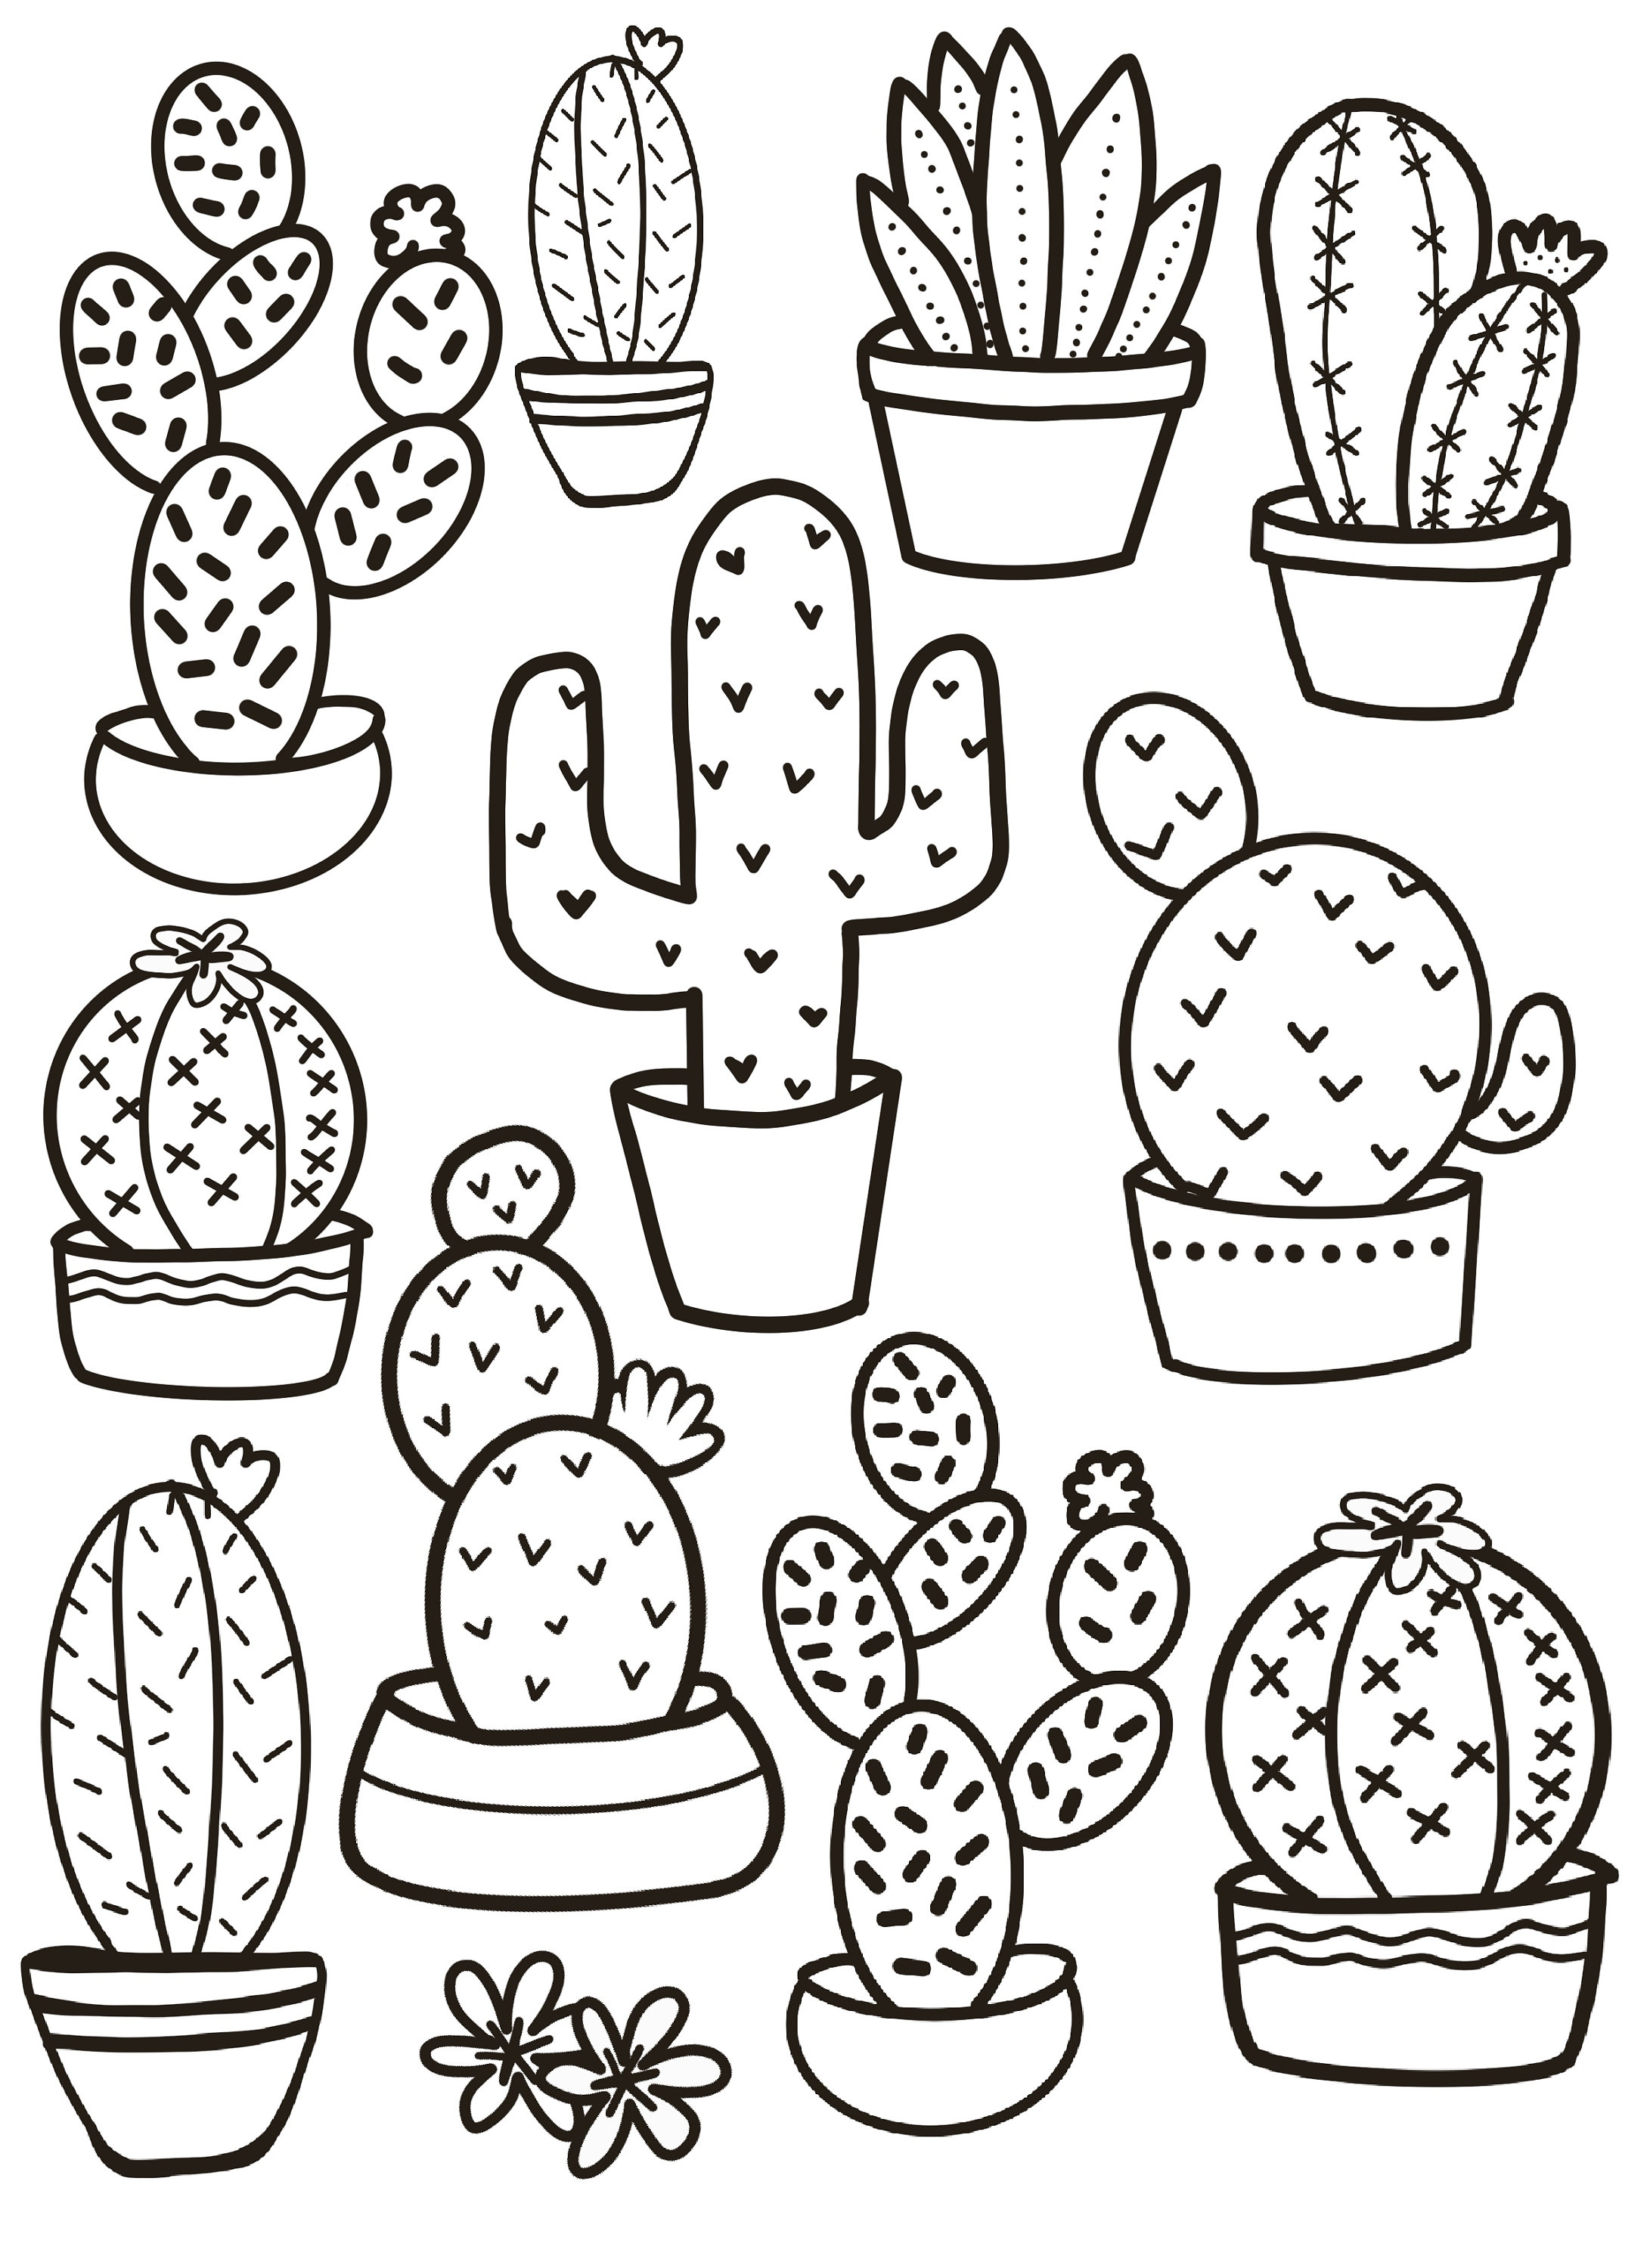 Coloring pages downloadable pages desert pages cactus coloring book cactus coloring page arizona art nature coloring pages mcactus